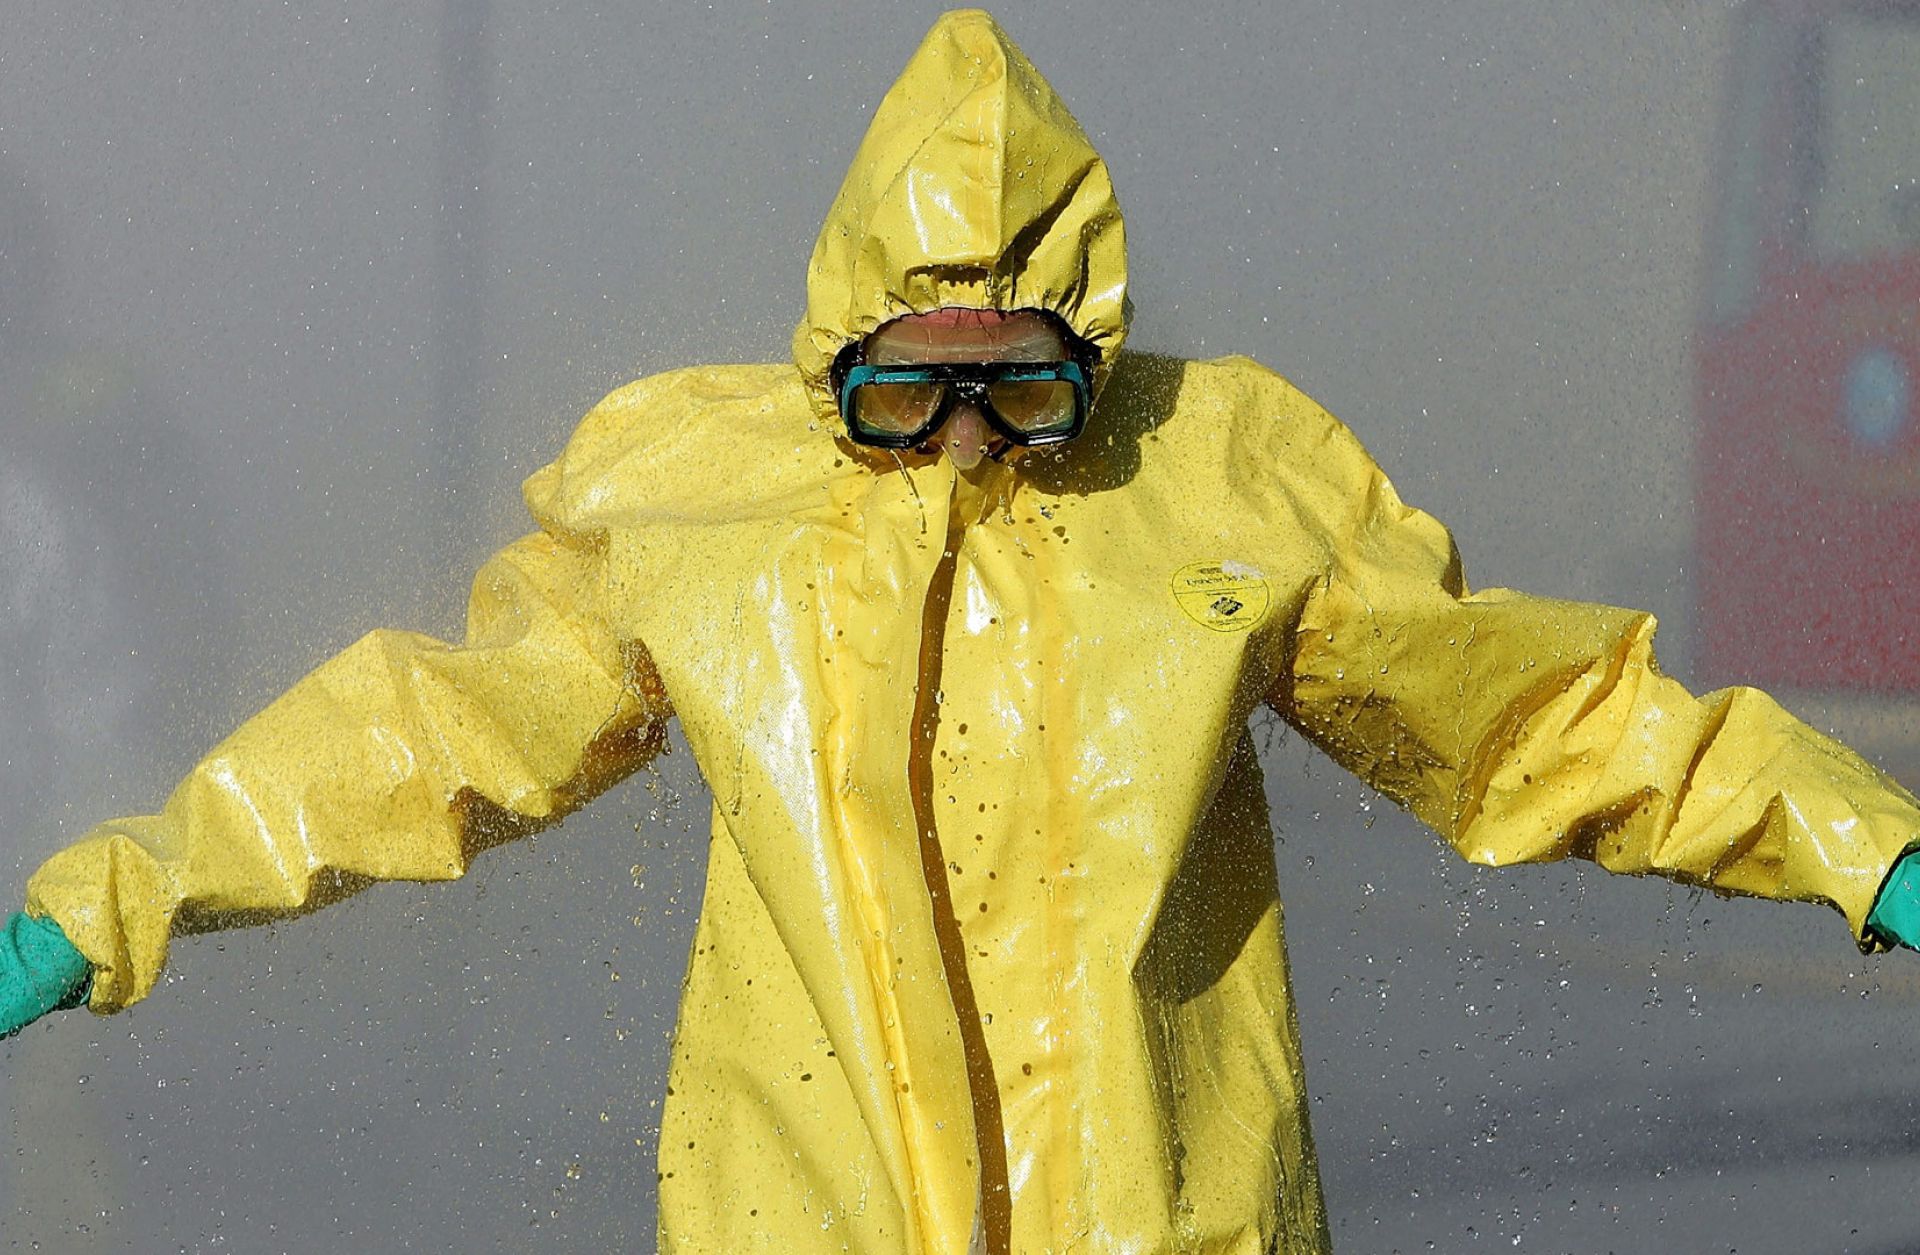 A man in a hazardous materials suit goes through a decontamination shower during a WMD training workshop in California.